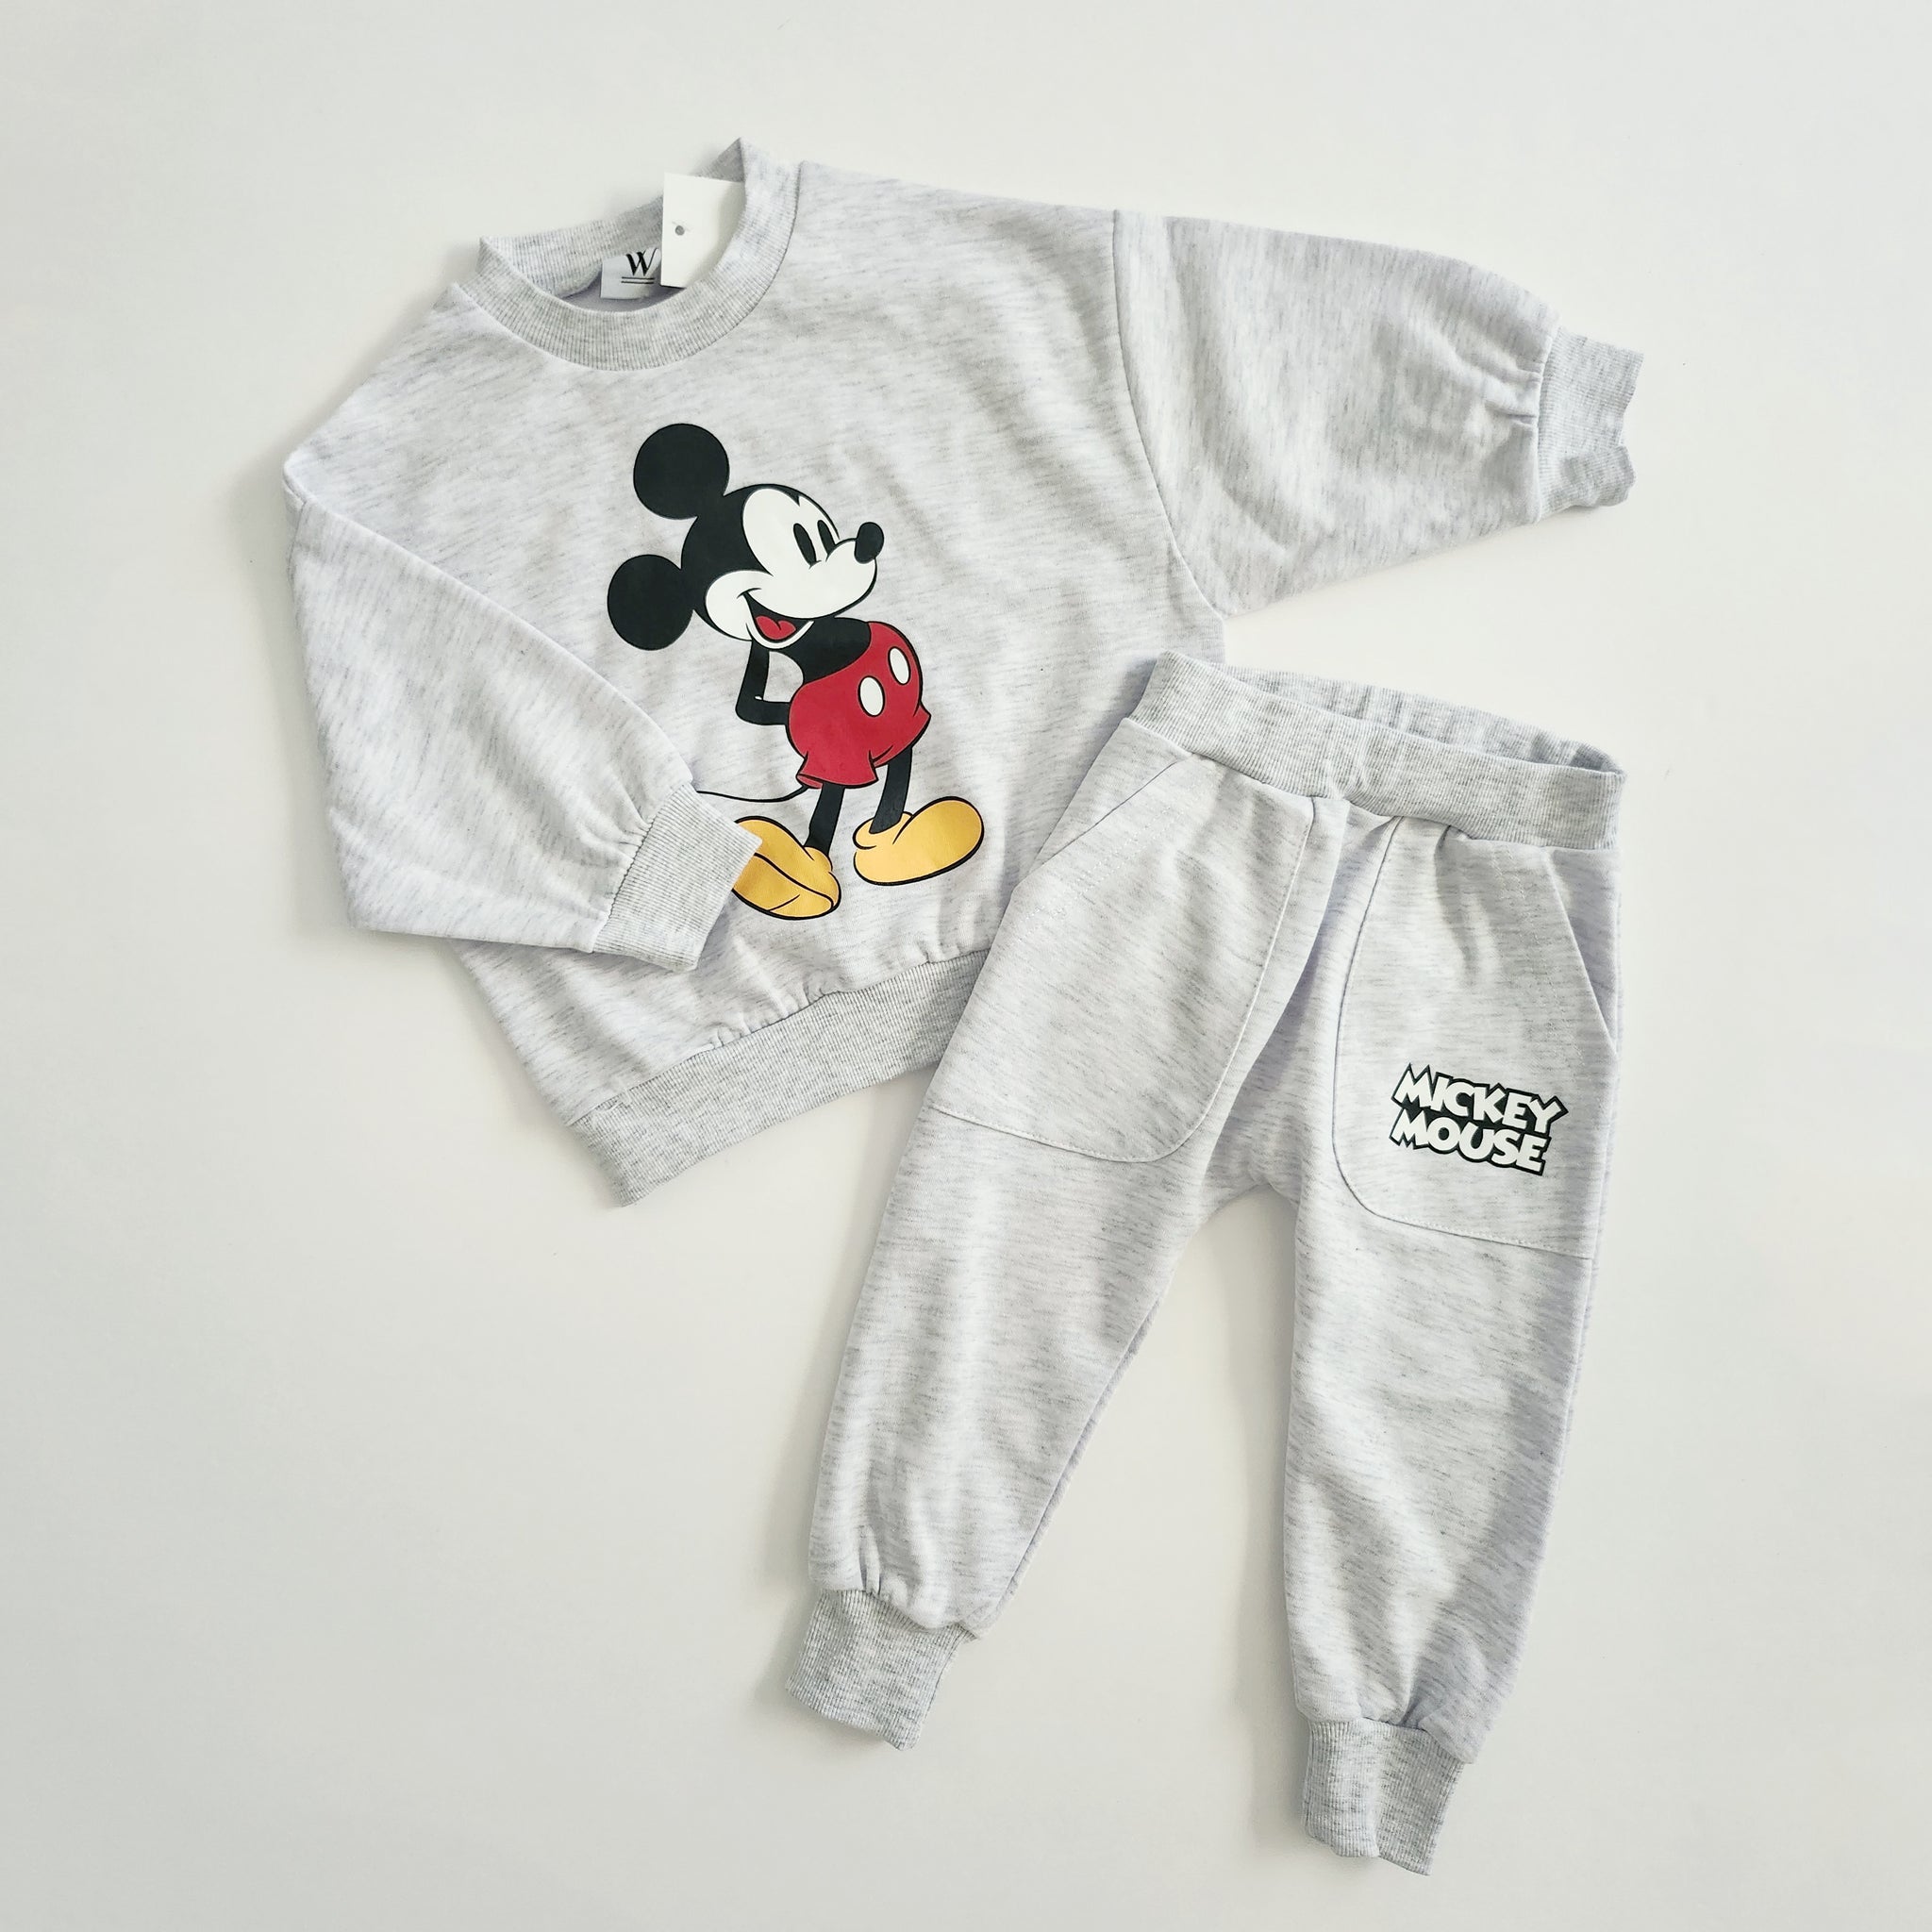 Toddler Mickey Mouse Sweatshirt and Pants Set (2-6y) - Grey